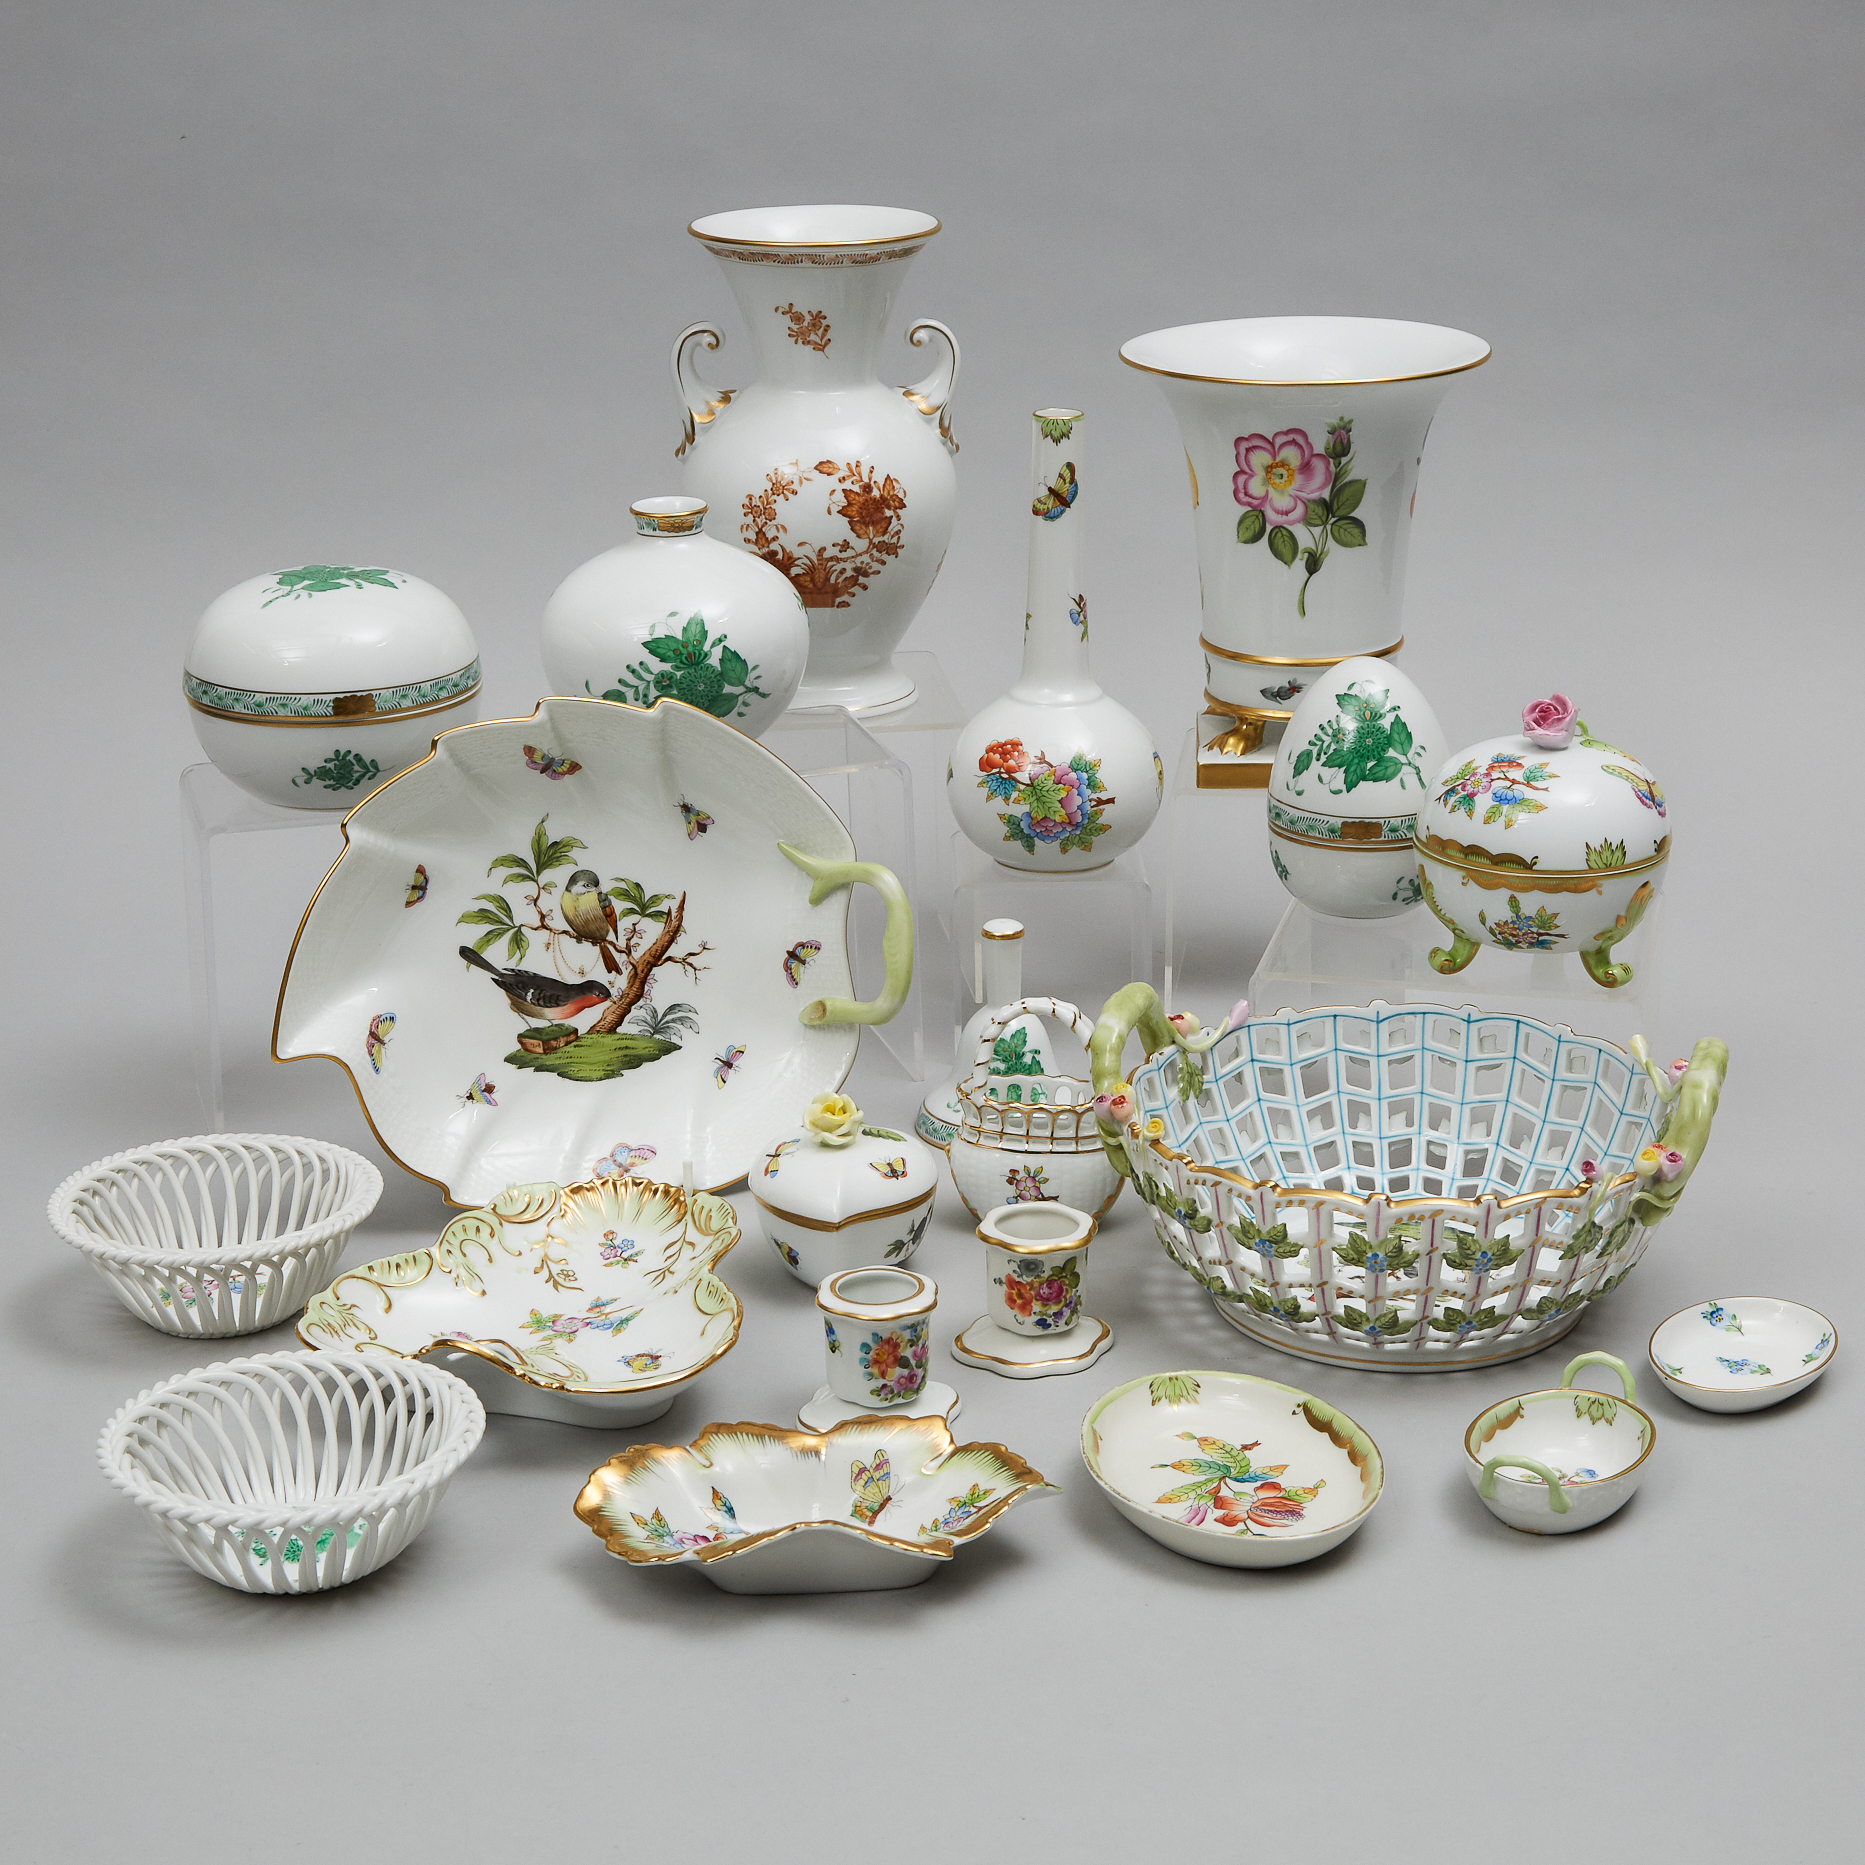 Group of Herend Porcelain, 20th century